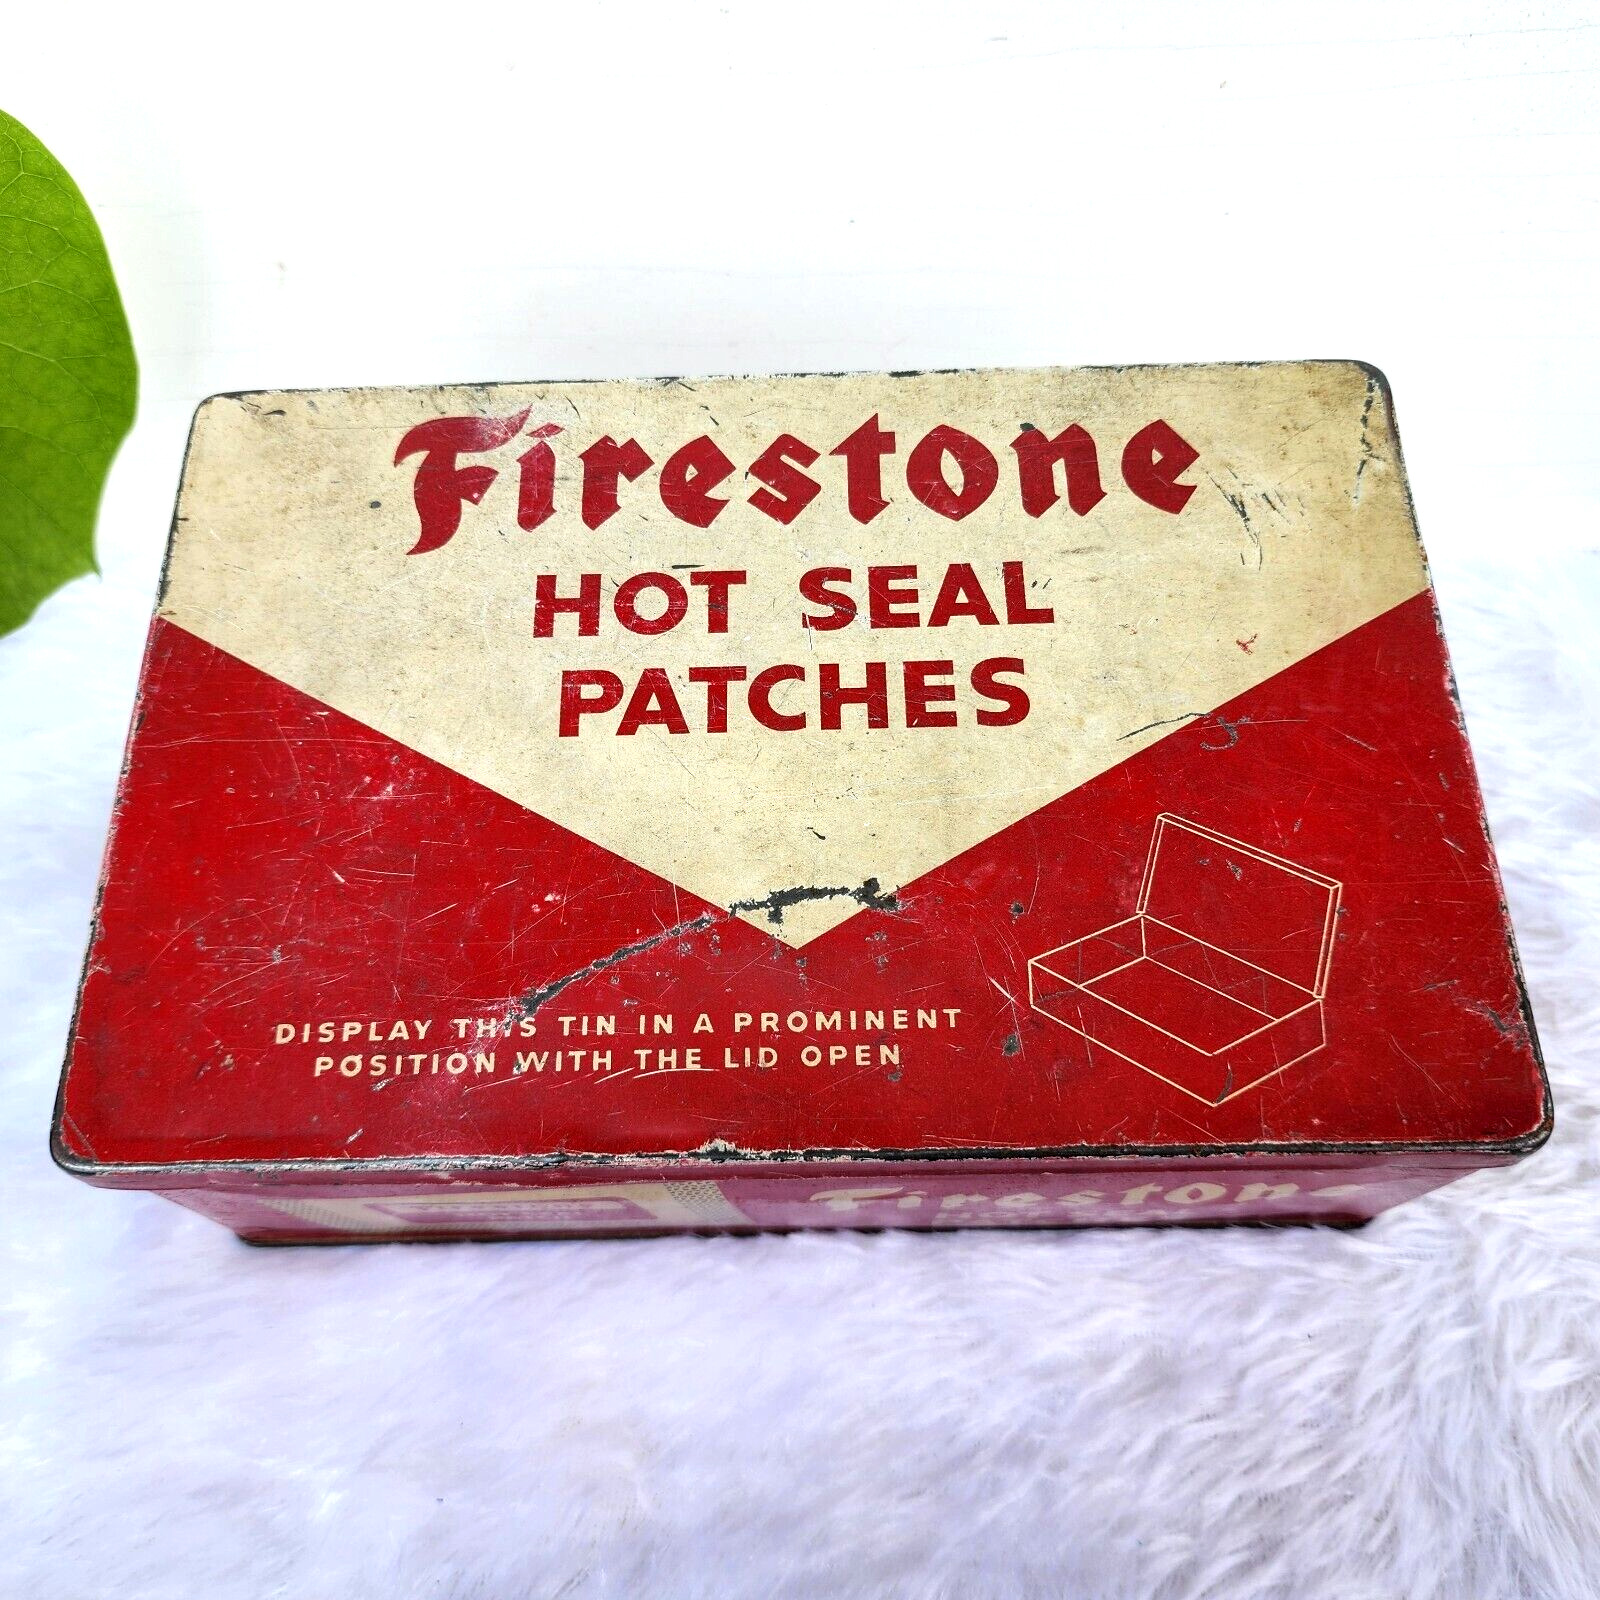 1940s Vintage Firestone Hot Seal Patches Advertising Tin Box Collectible TN66